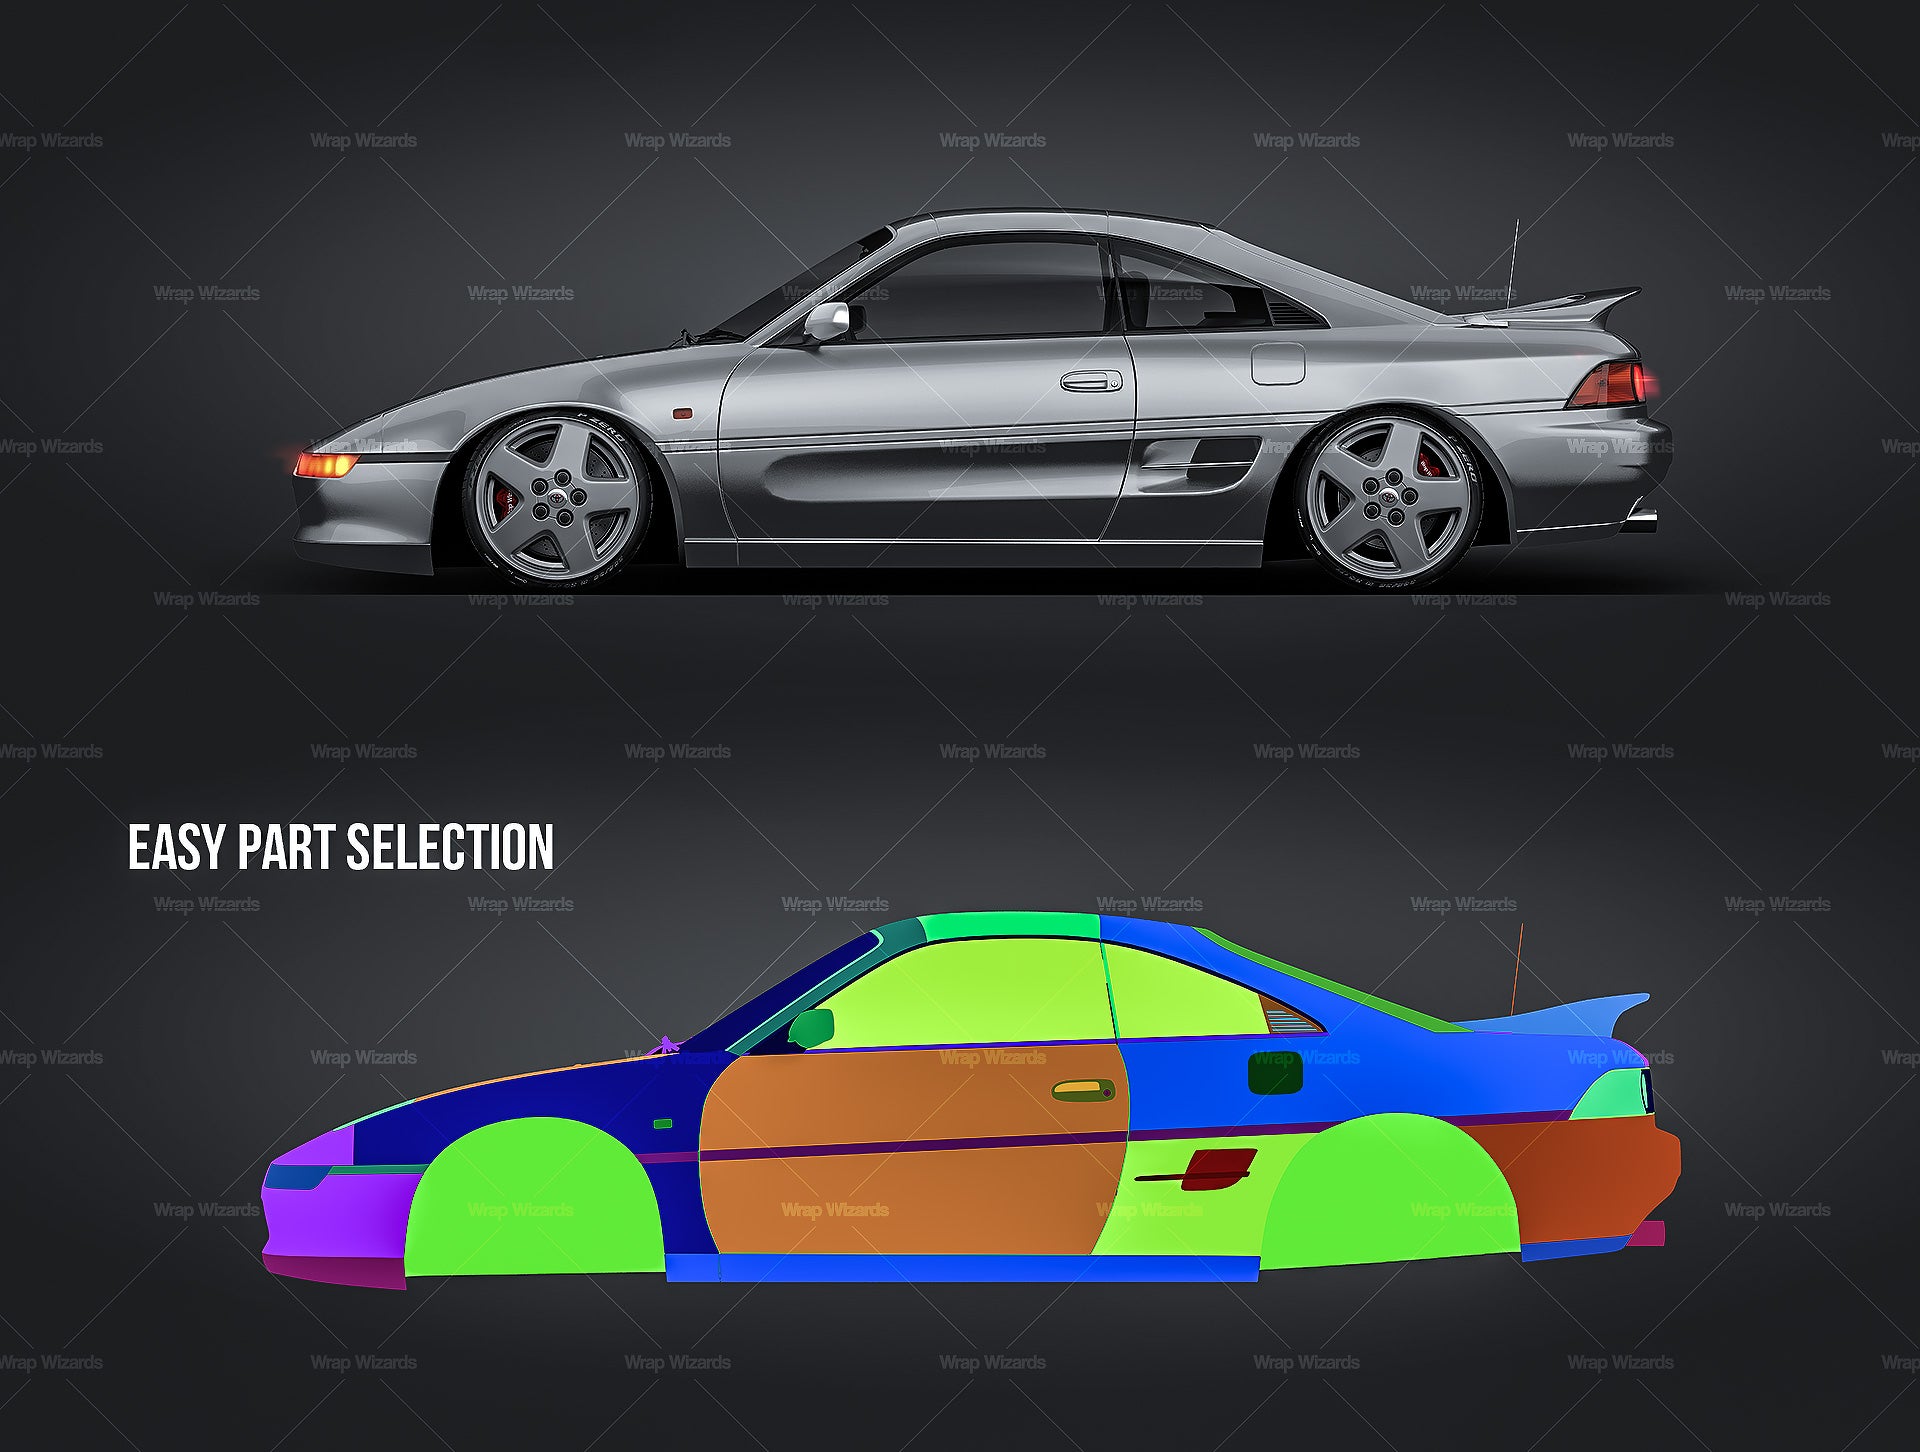 Toyota MR2 SW20 glossy finish - all sides Car Mockup Template.psd